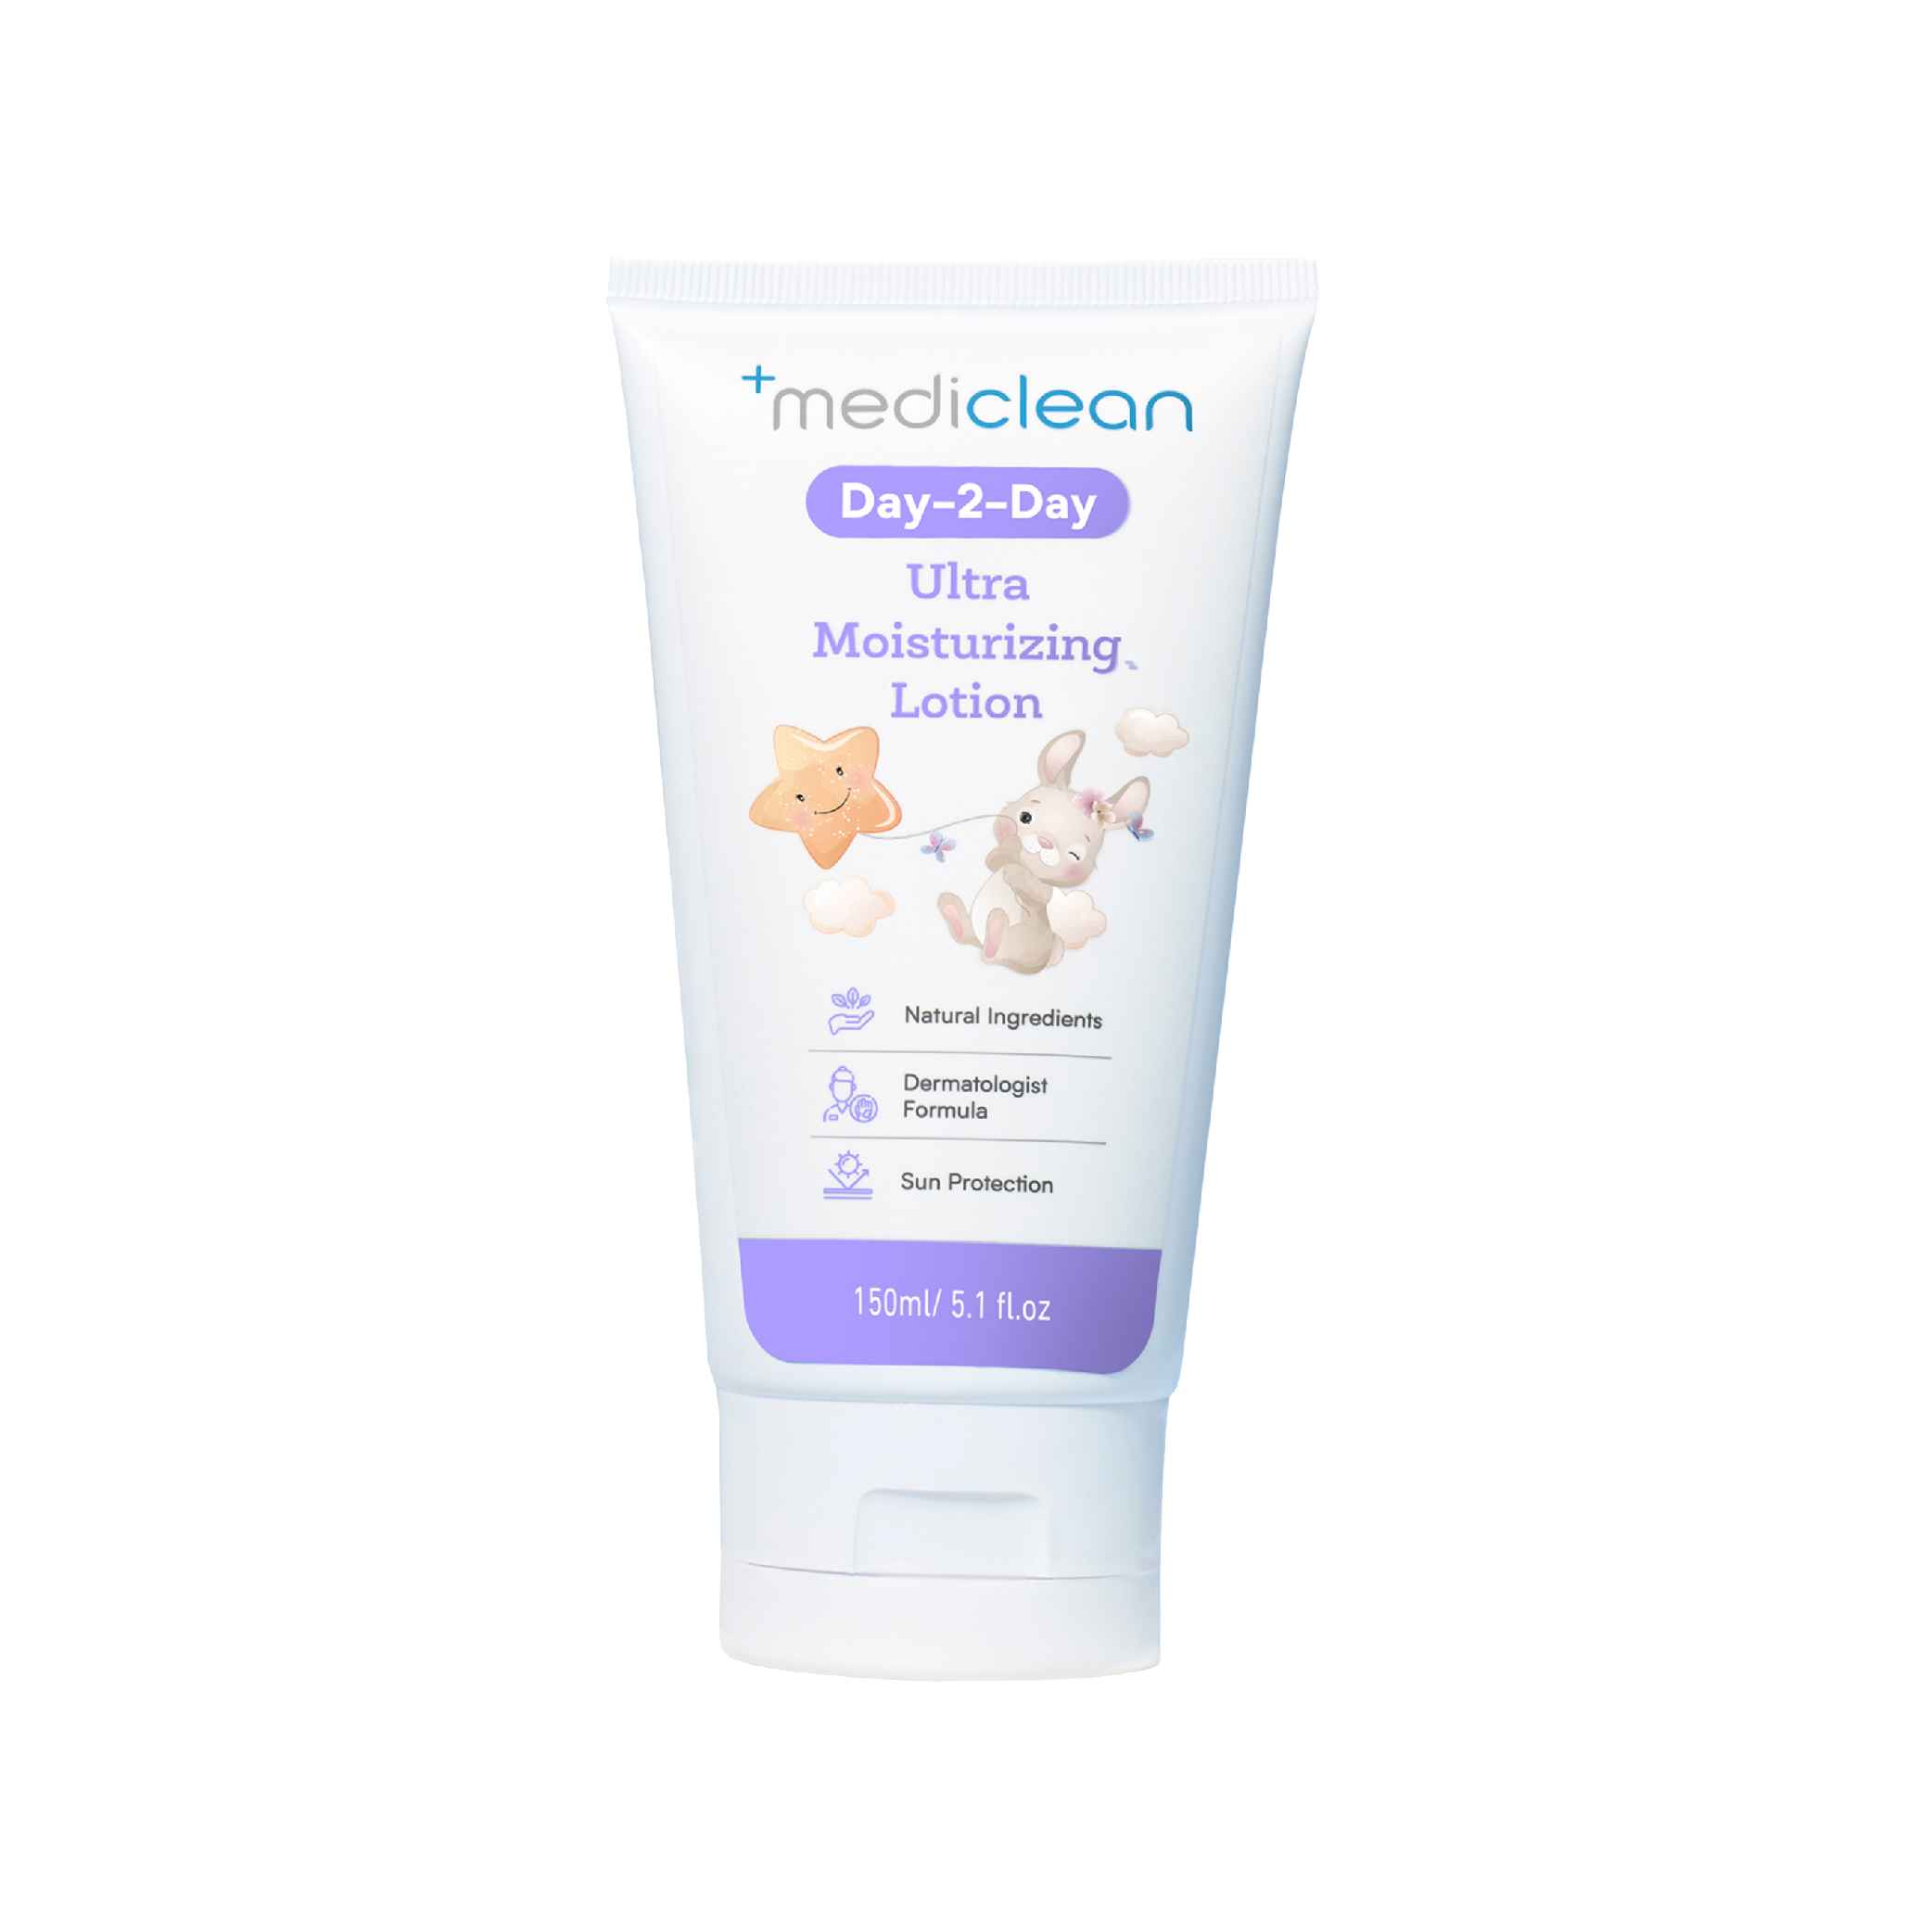 Mediclean Day 2 Day Ultra Moisturizing Lotion 